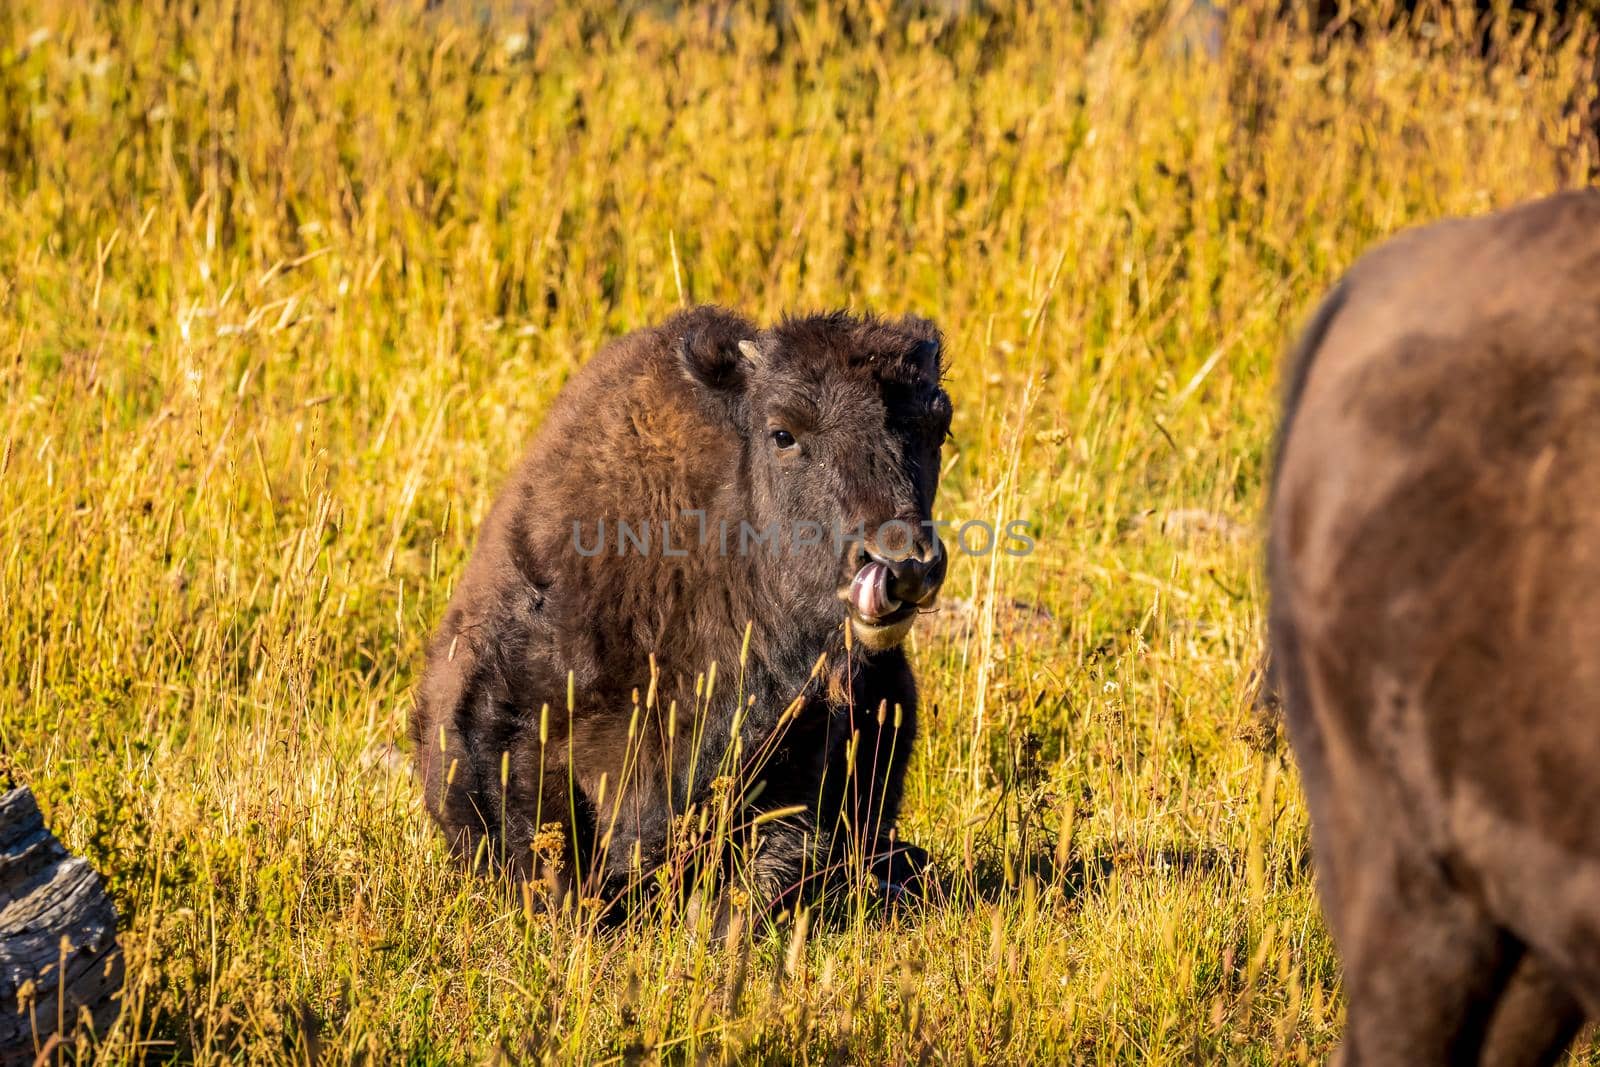 WIld bison calf resting at Yellowstone National Park